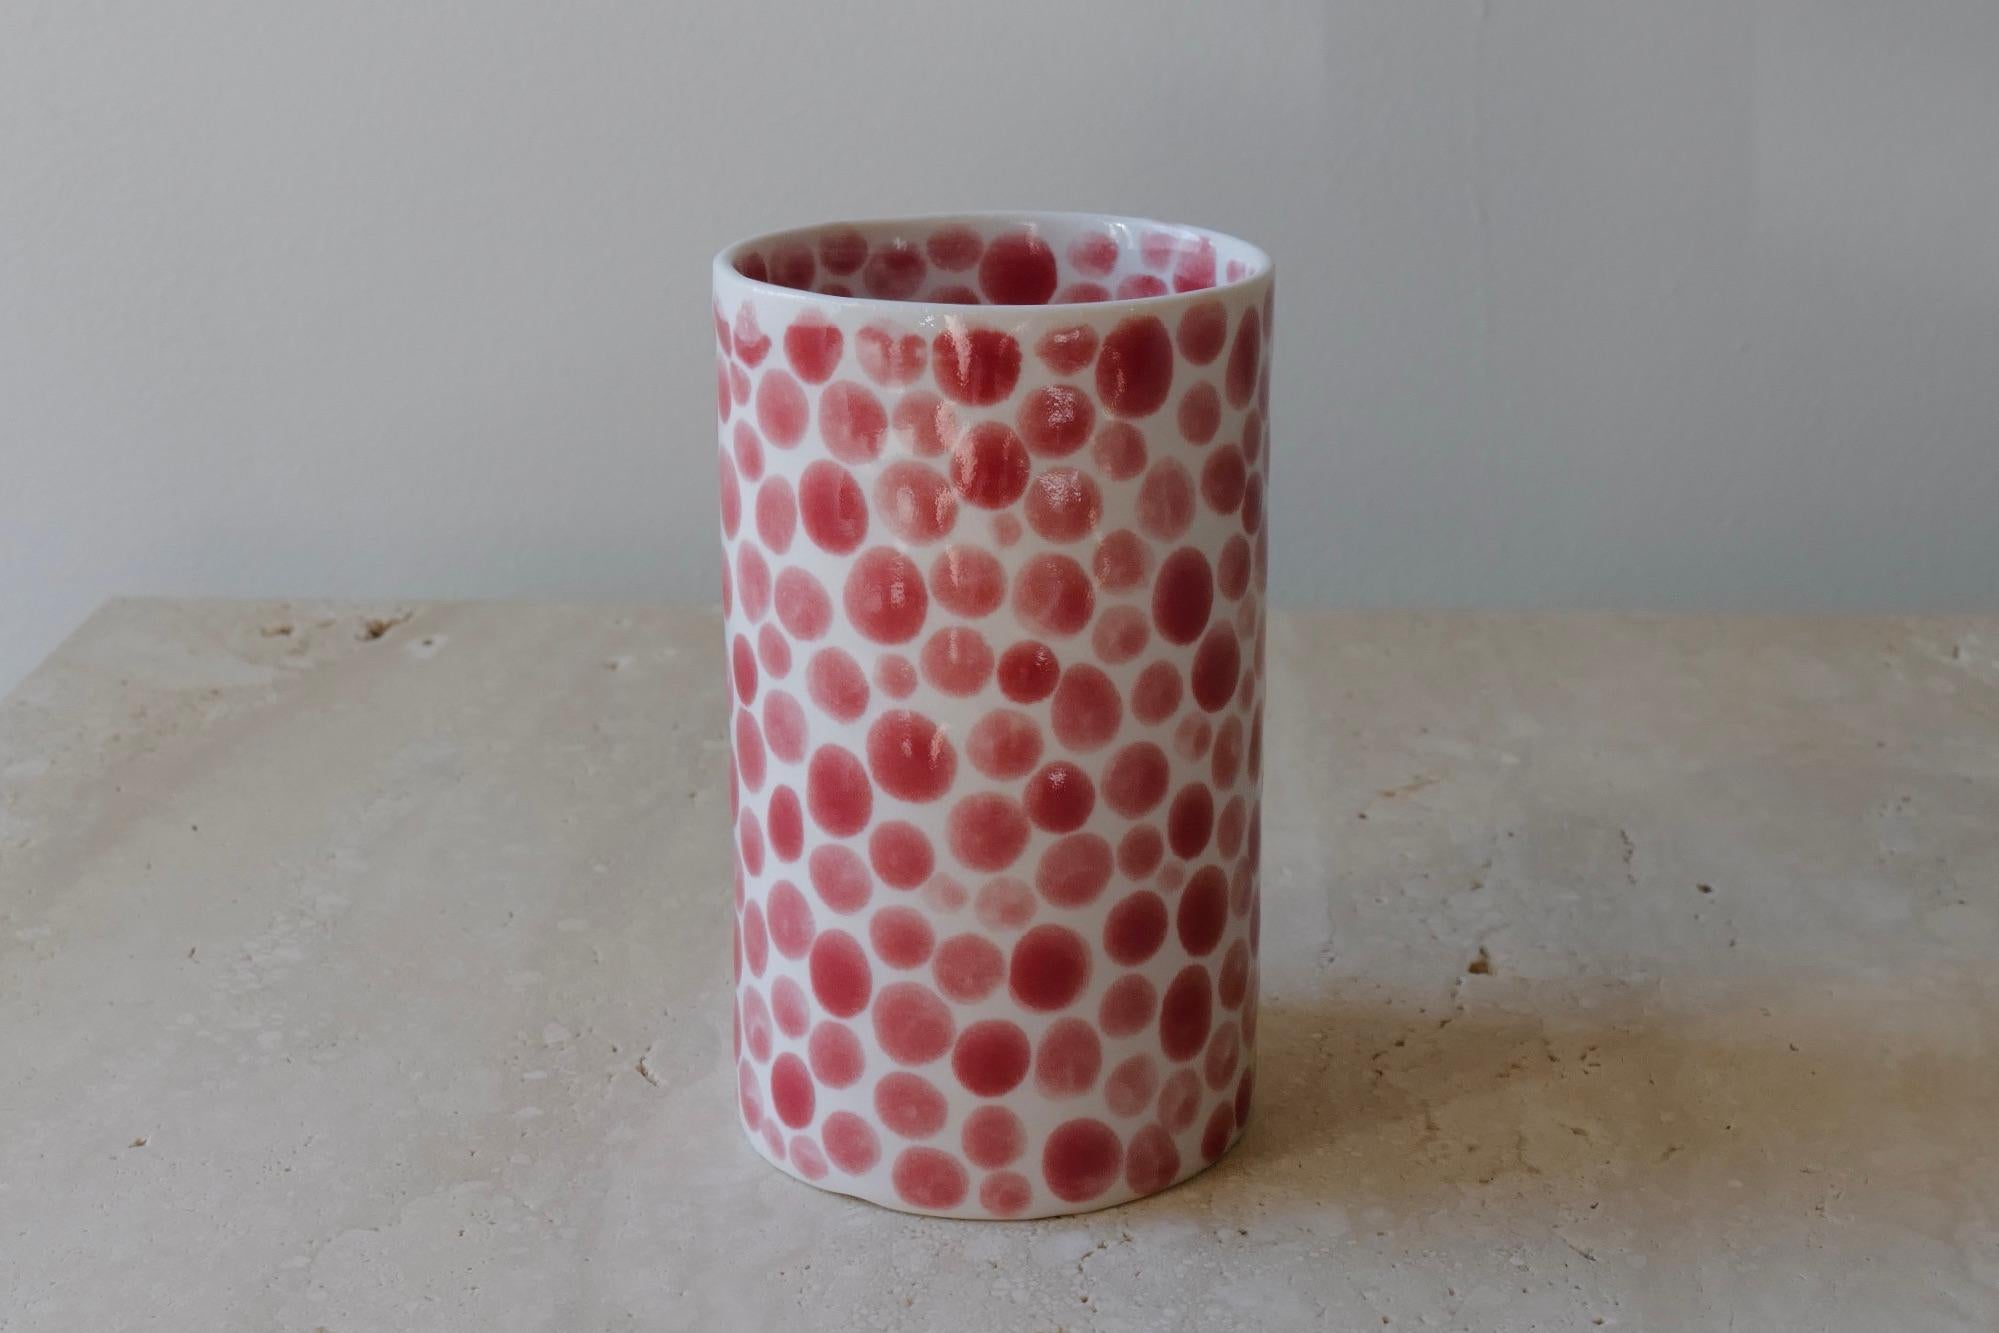 Ceramic drinking cup. Hand-cast in porcelain and once bisque fired, each dot is hand-painted with a shiny red glaze. An unconventional layered glazing technique, developed by the artist, is used in these cast porcelain pieces. The straight walls and